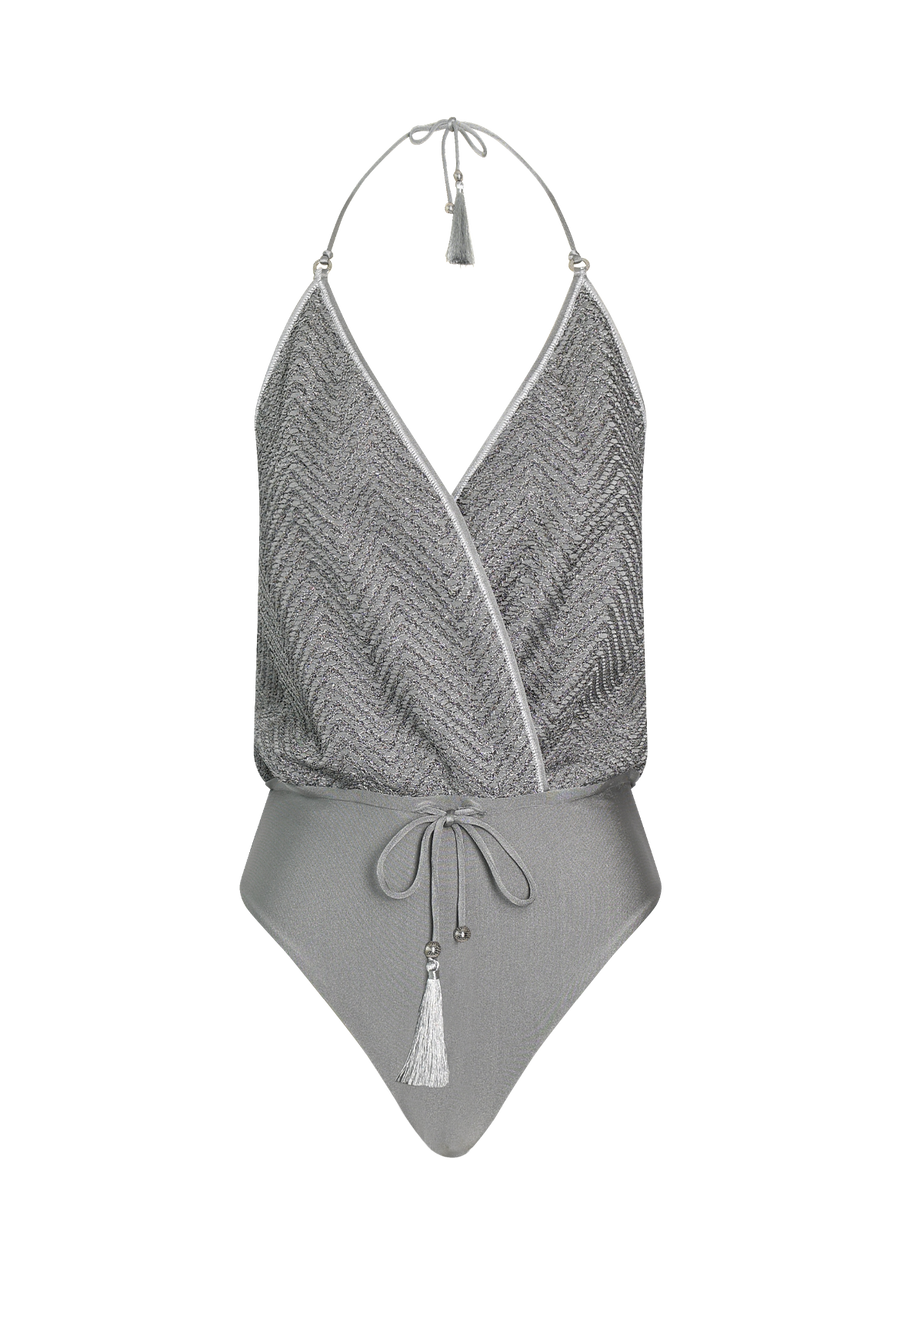 Product photo of vacation Silver Knit Swimsuit doubles as top for warm beach swimming & vacation.